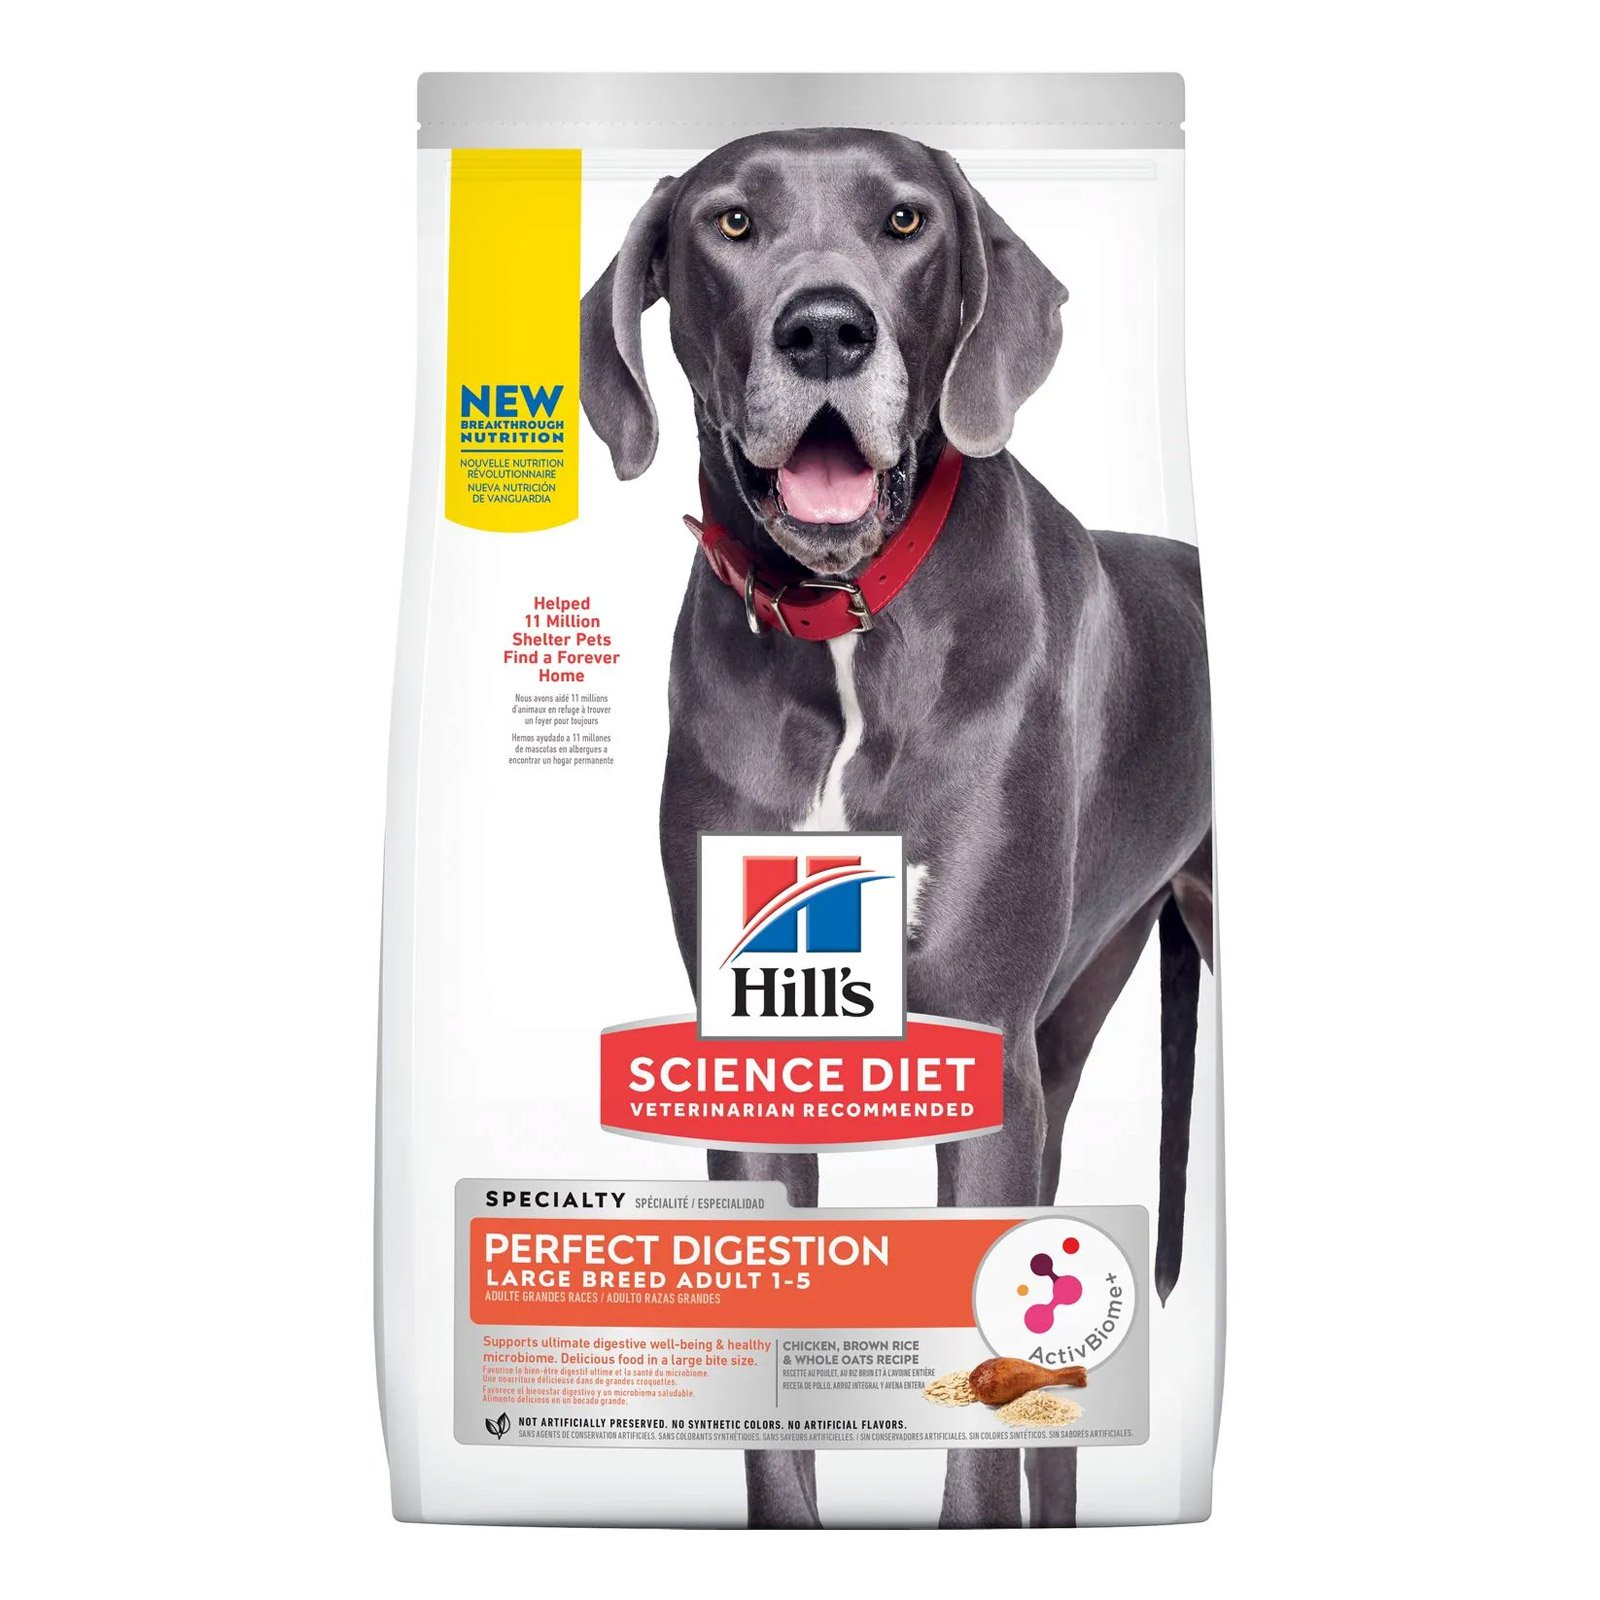 Hill's Science Diet Perfect Digestion Large Breed Dog Food 9.98 Kg